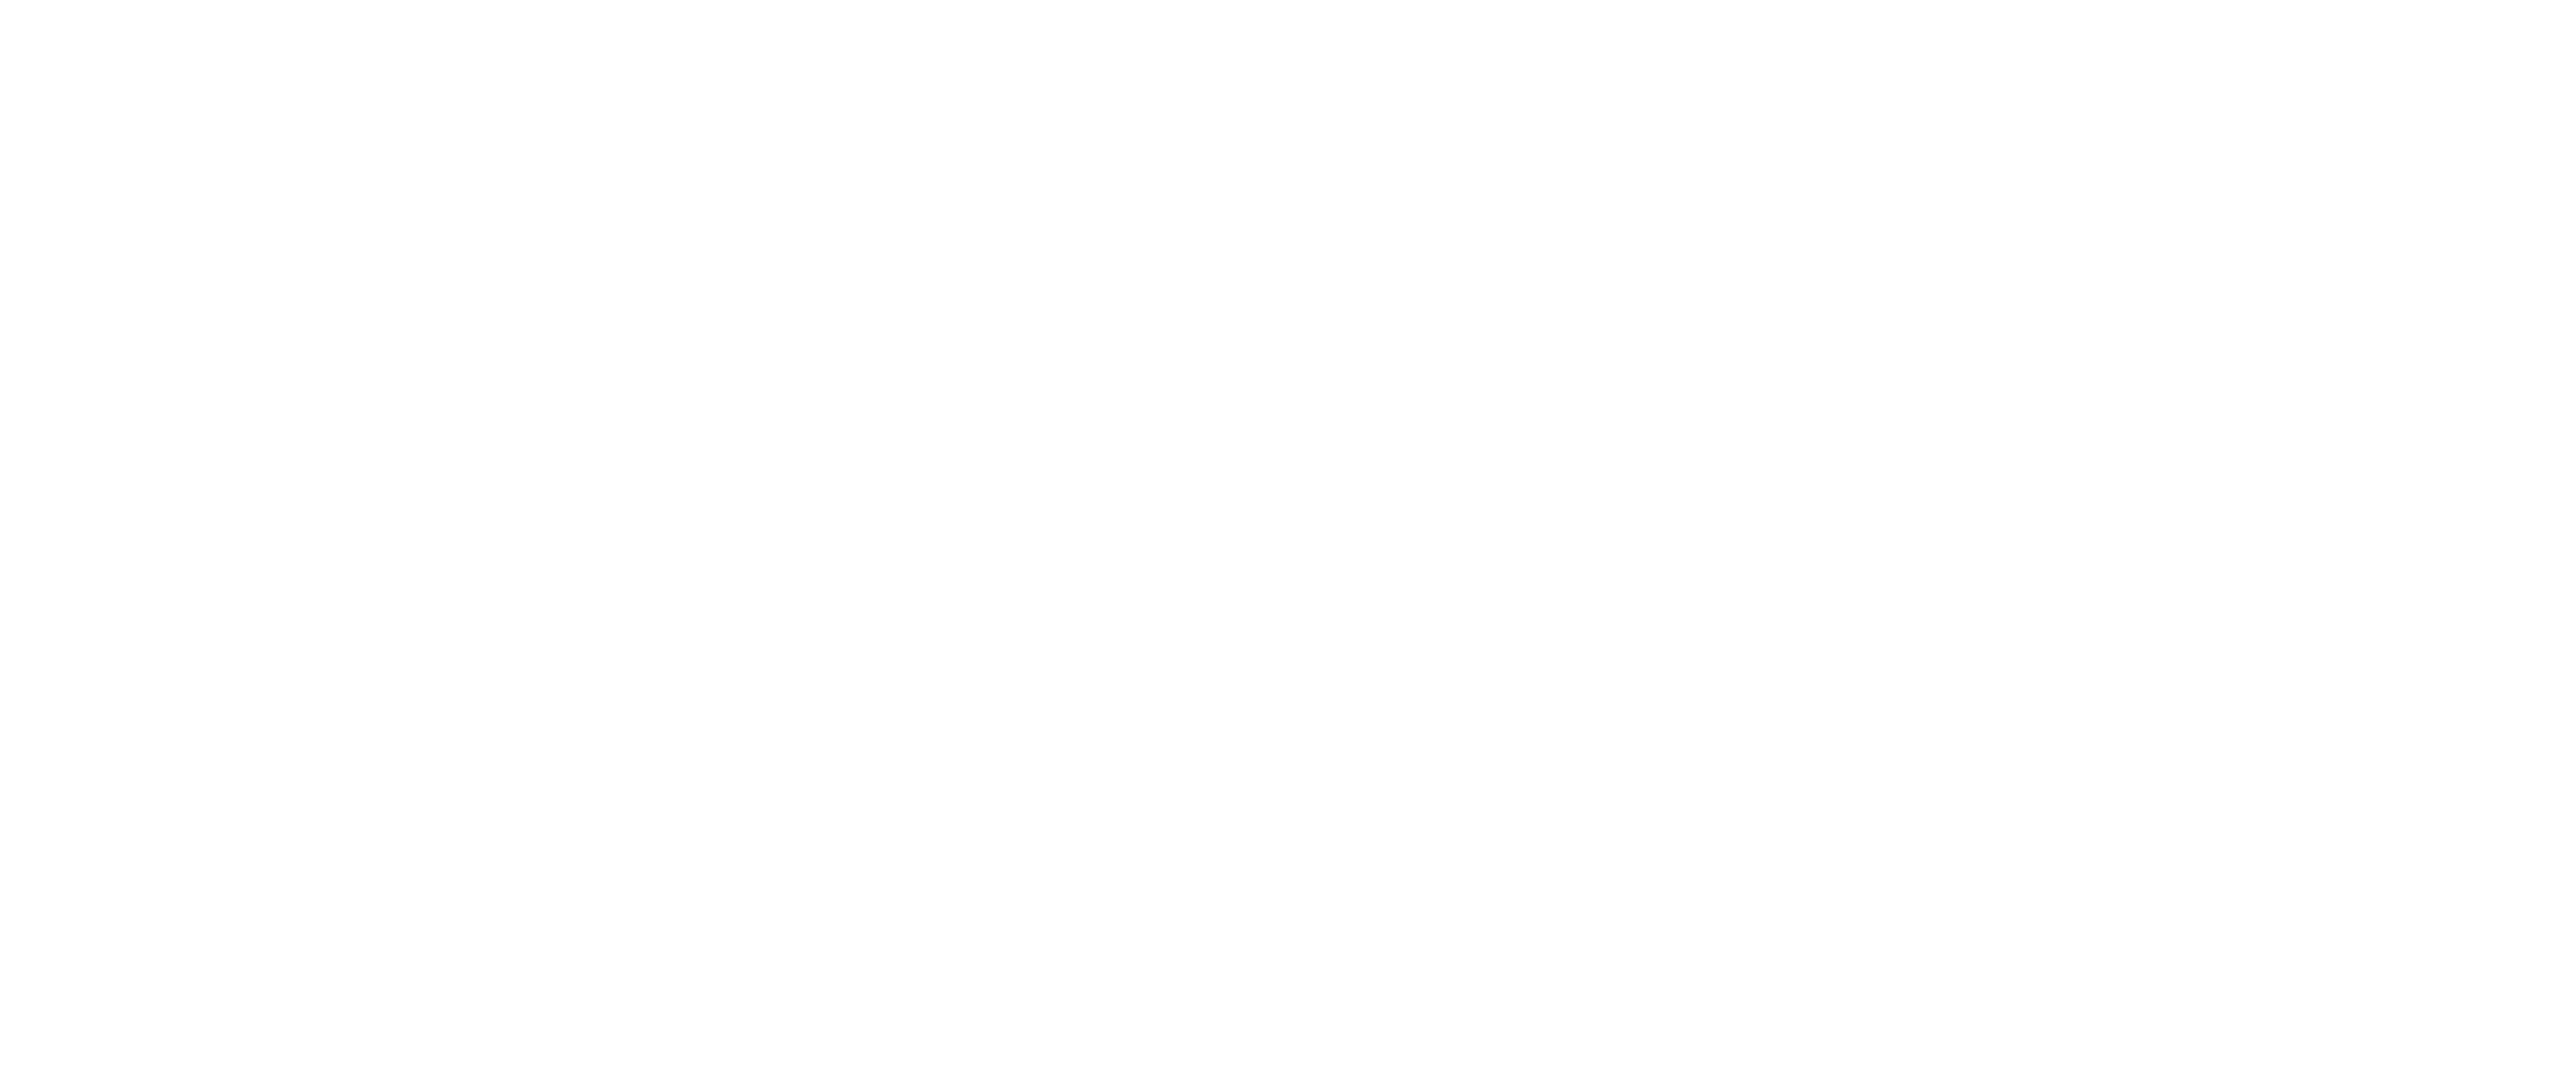 Groups Recover Together White Logo